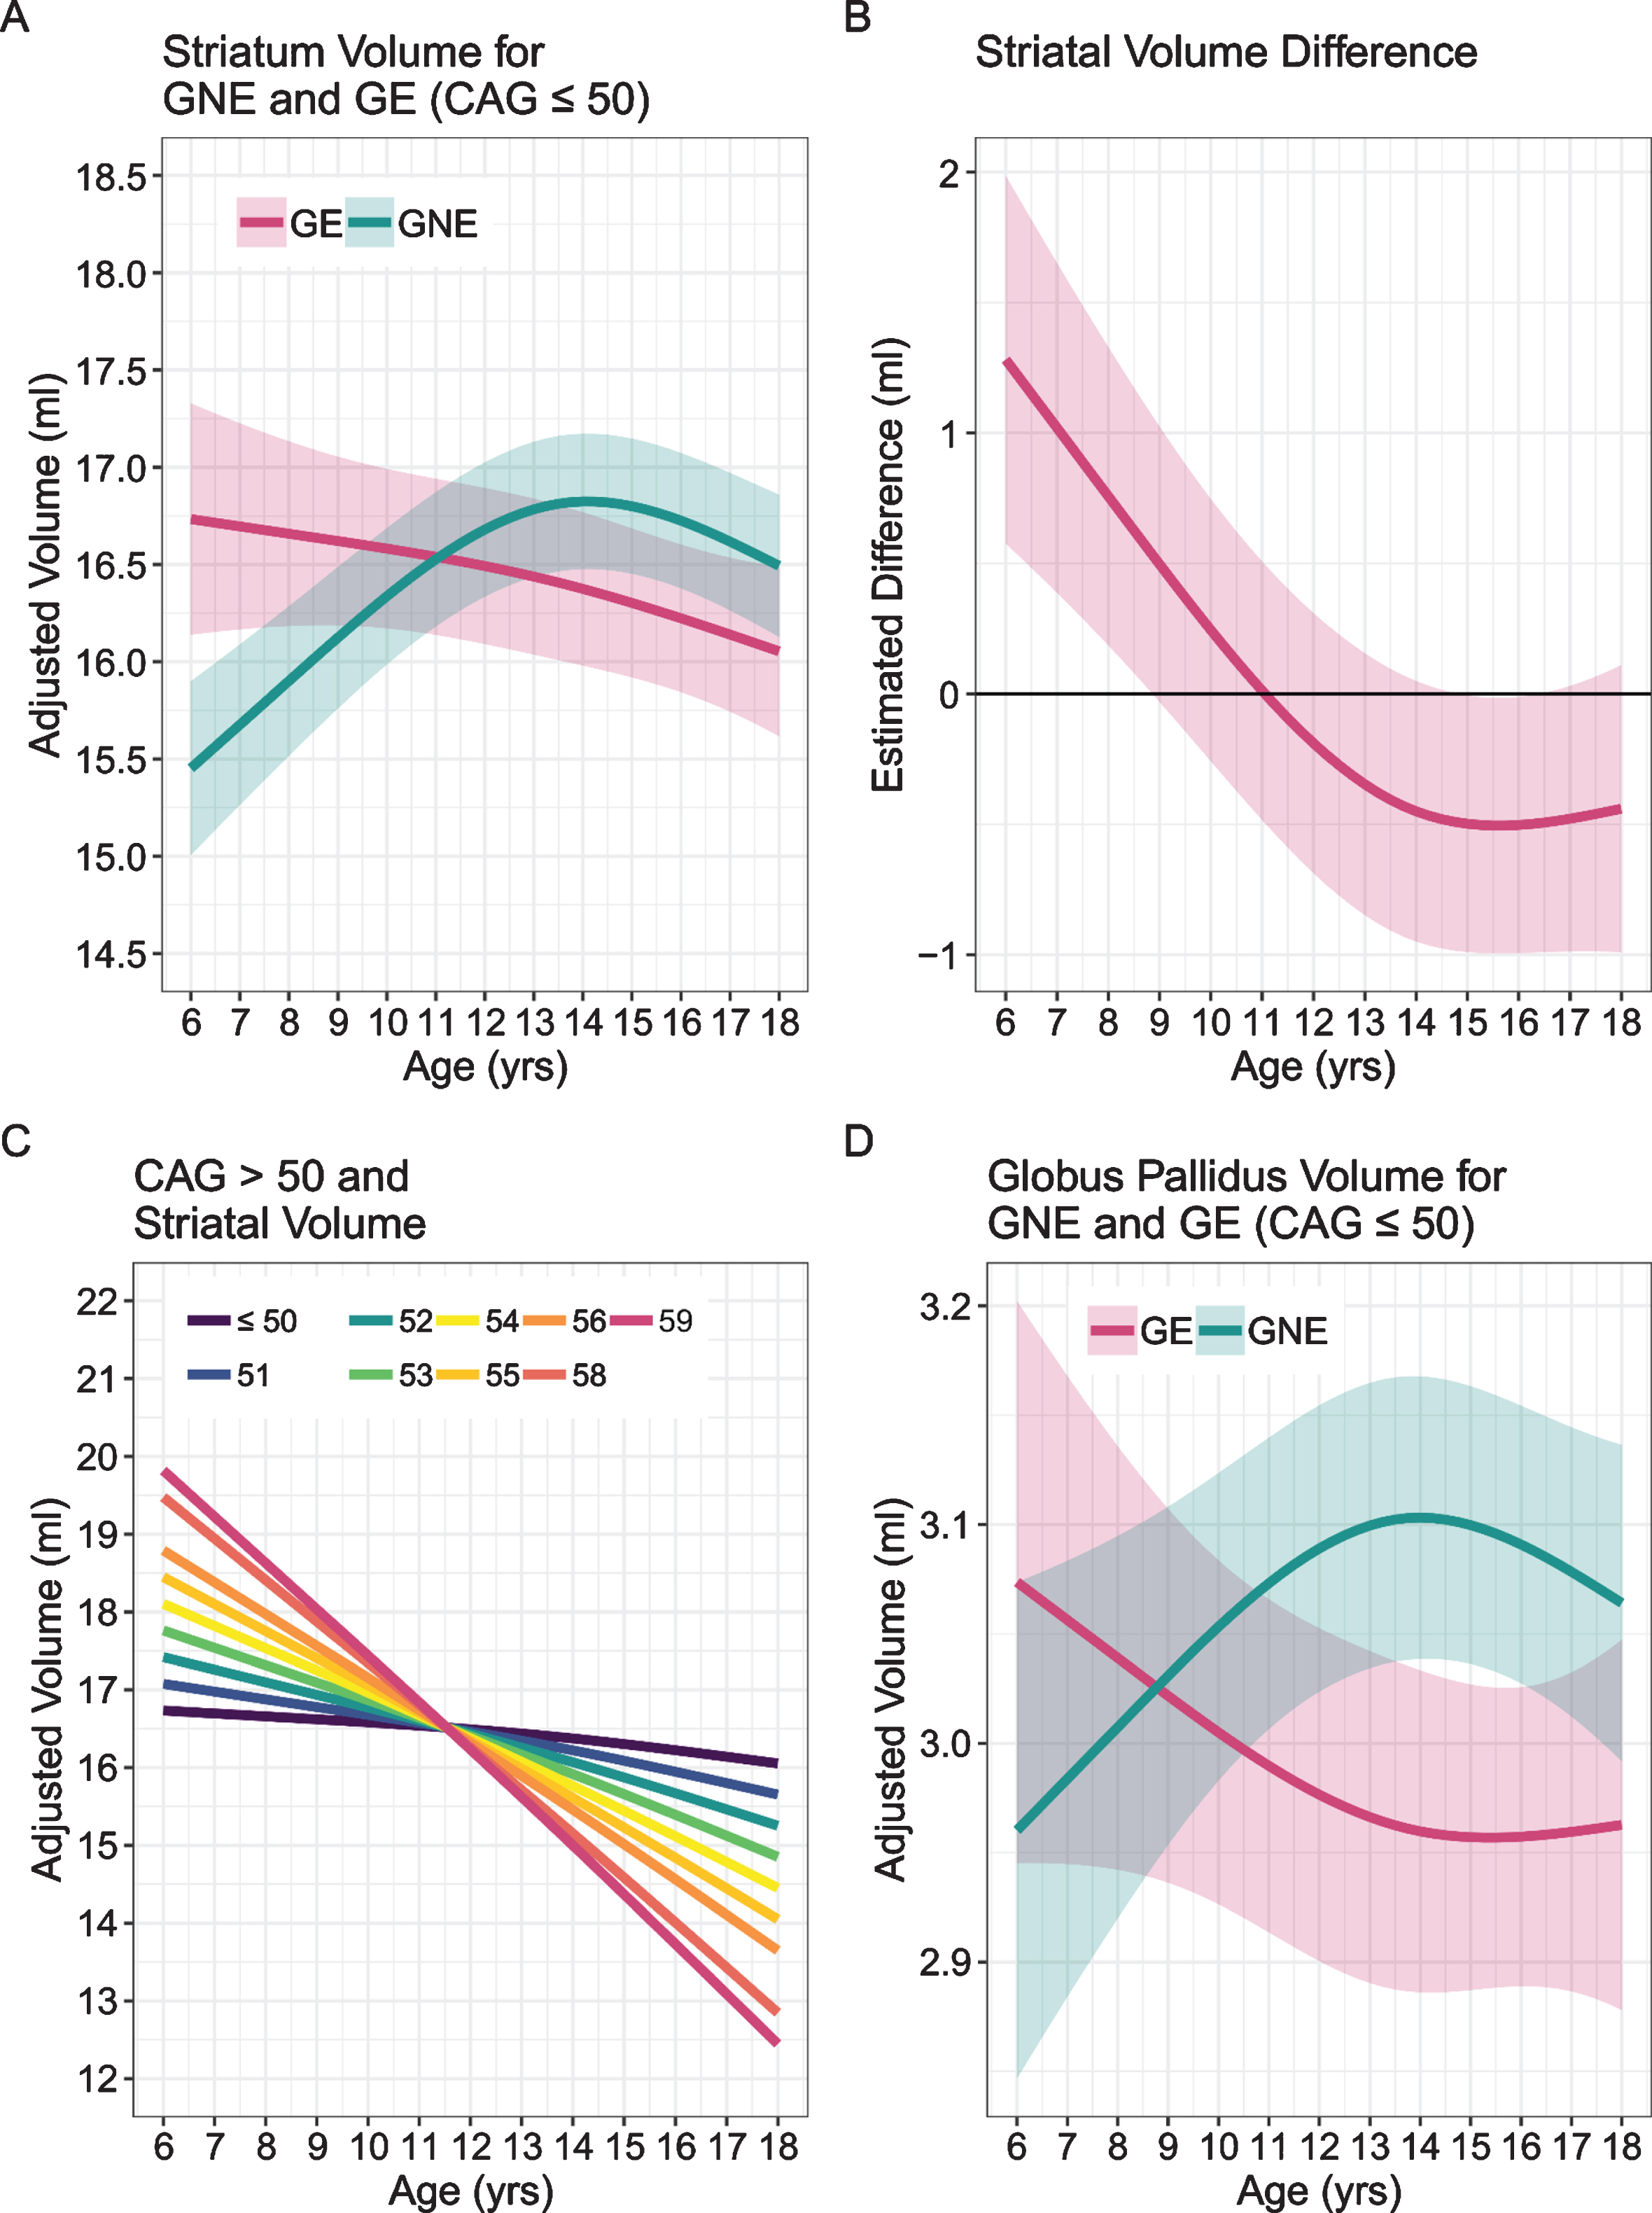 A) Mean estimated age-dependent change of striatal volume in the GE (red) and GNE (green) groups. Note that the GE curve is based on individuals with CAG < 50, and that results were averaged across sex. B) Striatal volume diference (y-axis) between GE group (red) and GNE group (horizontal black line) across age (x-axis), along with 95% confidence limits of the difference scores. C) The impact of CAG repeat length on striatal volume (y-axis) across age (x-axis). CAG repeats <50 did not affect striatal growth curves (horizontal line labeled <50). For repeats >50, additional repeats were associated with accelerated striatal decline in adolescence, and possibly with greater hypertrophy before age 10. D) Mean estimated age-dependent change of the globus pallidus.